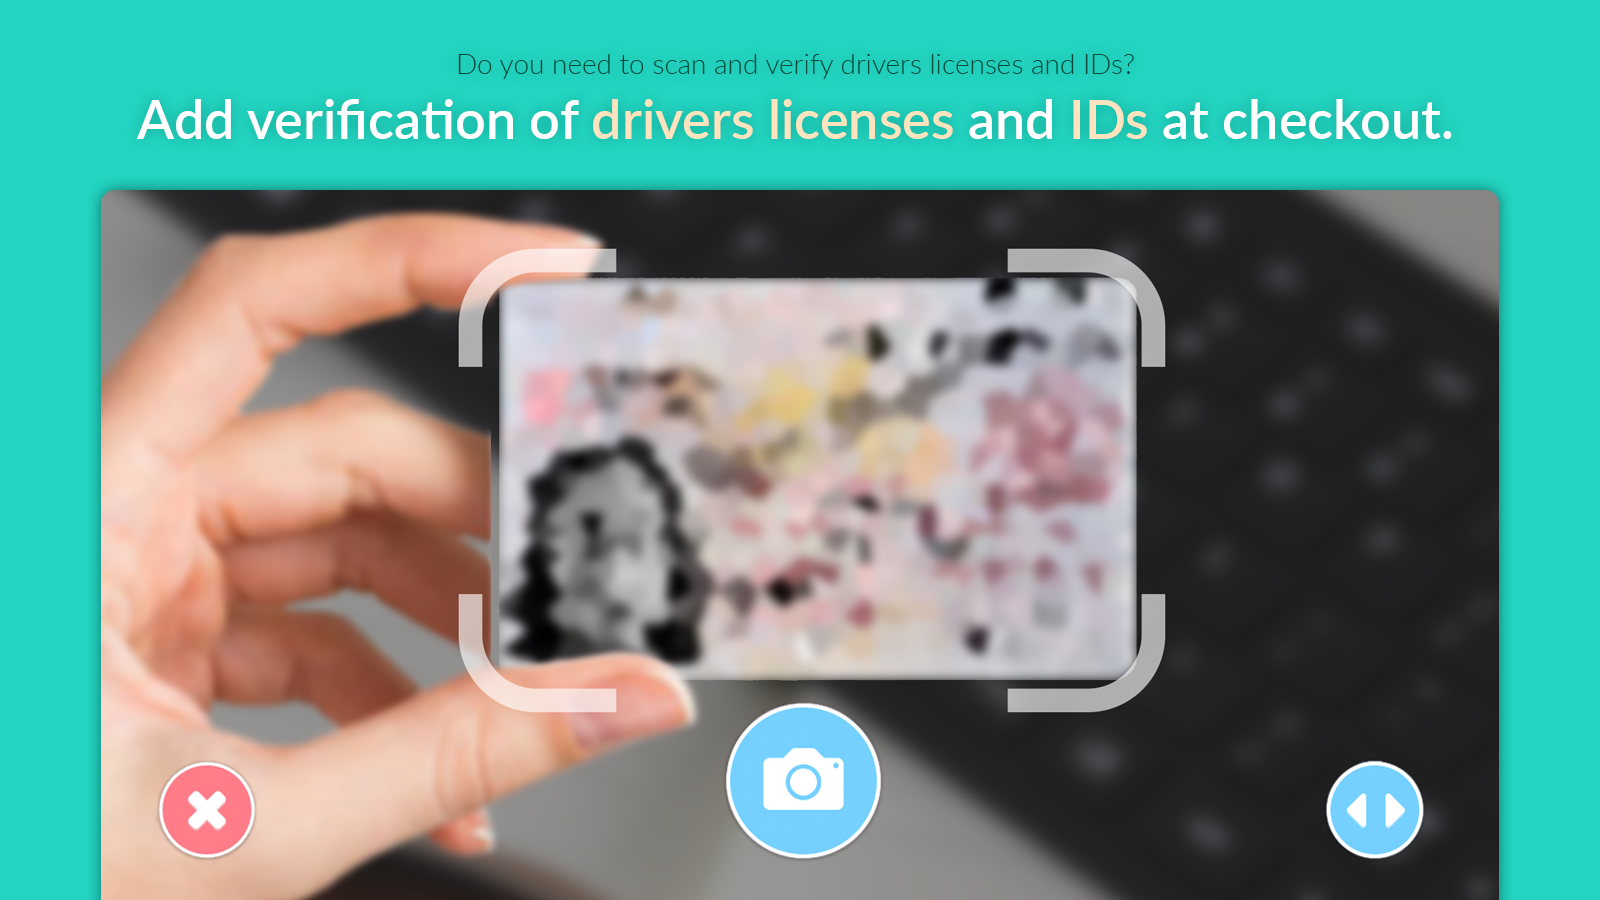 Scan and verify drivers licenses at checkout.